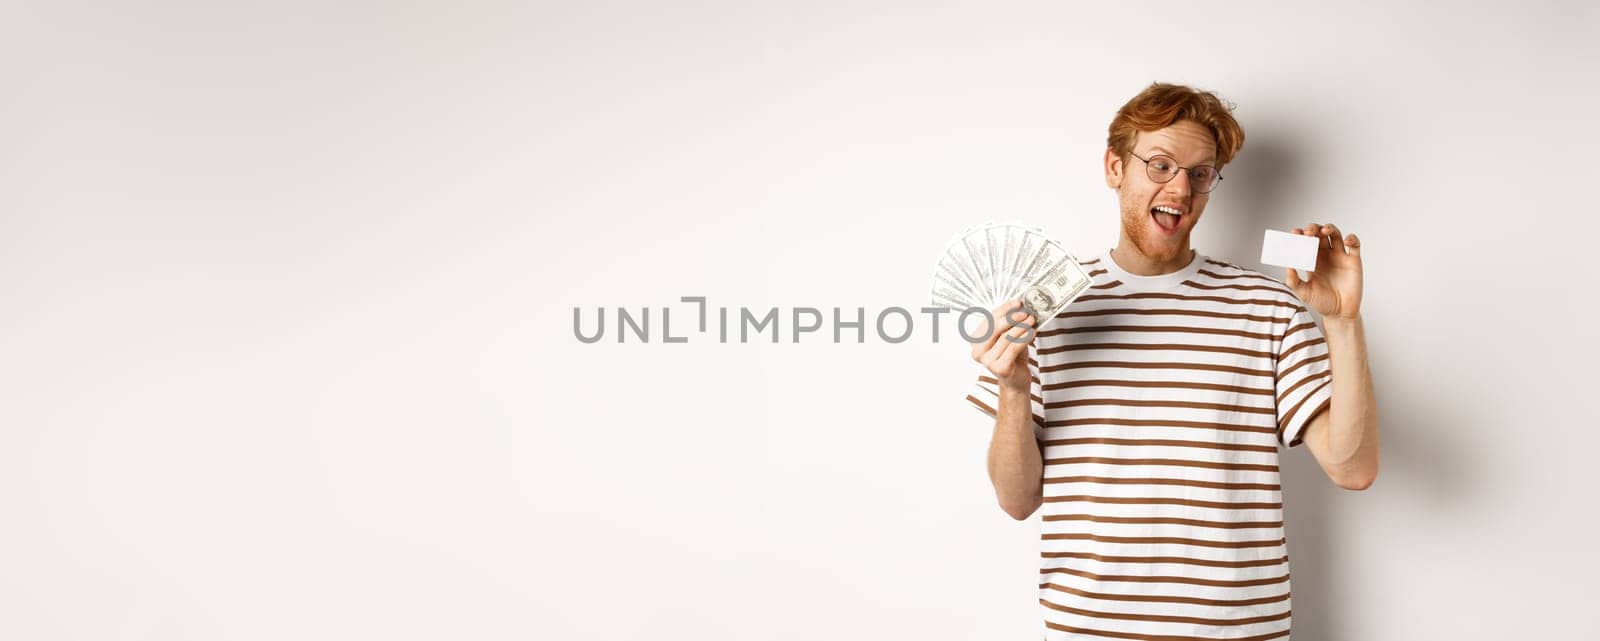 Shopping and finance concept. Young redhead man in glasses choosing plastic credit card, showing dollars and smiling, standing over white background.